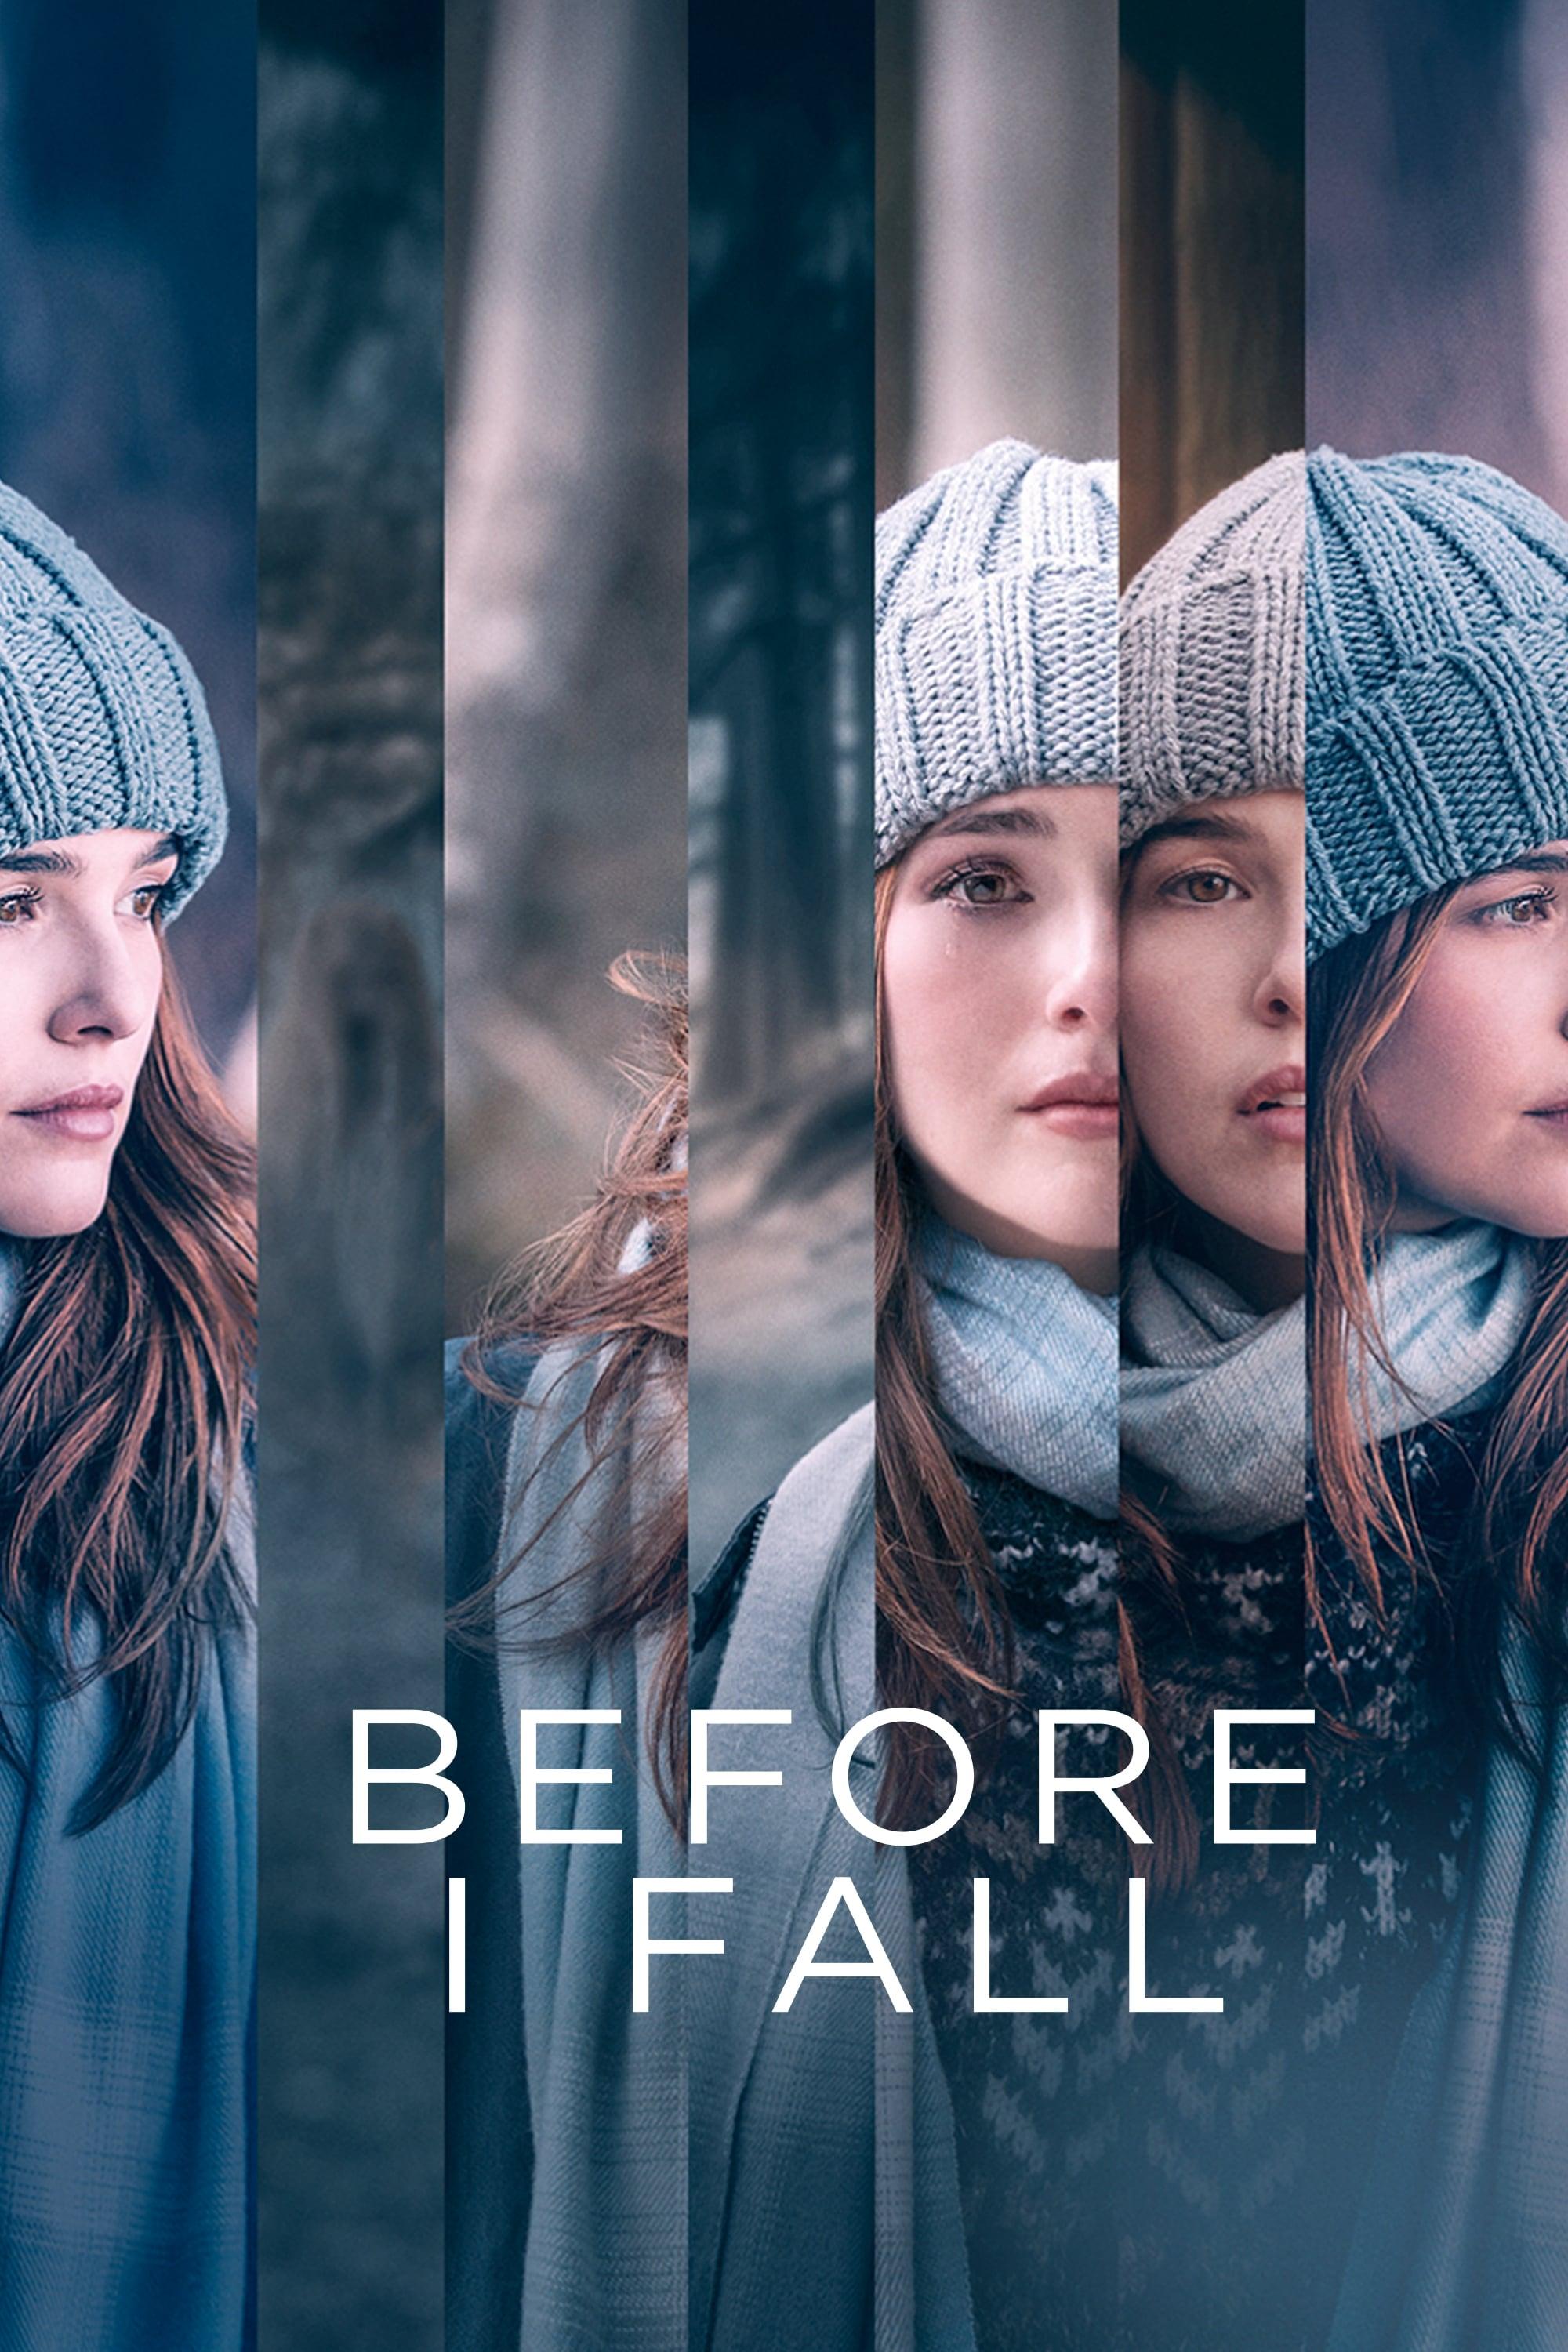 Before I Fall poster